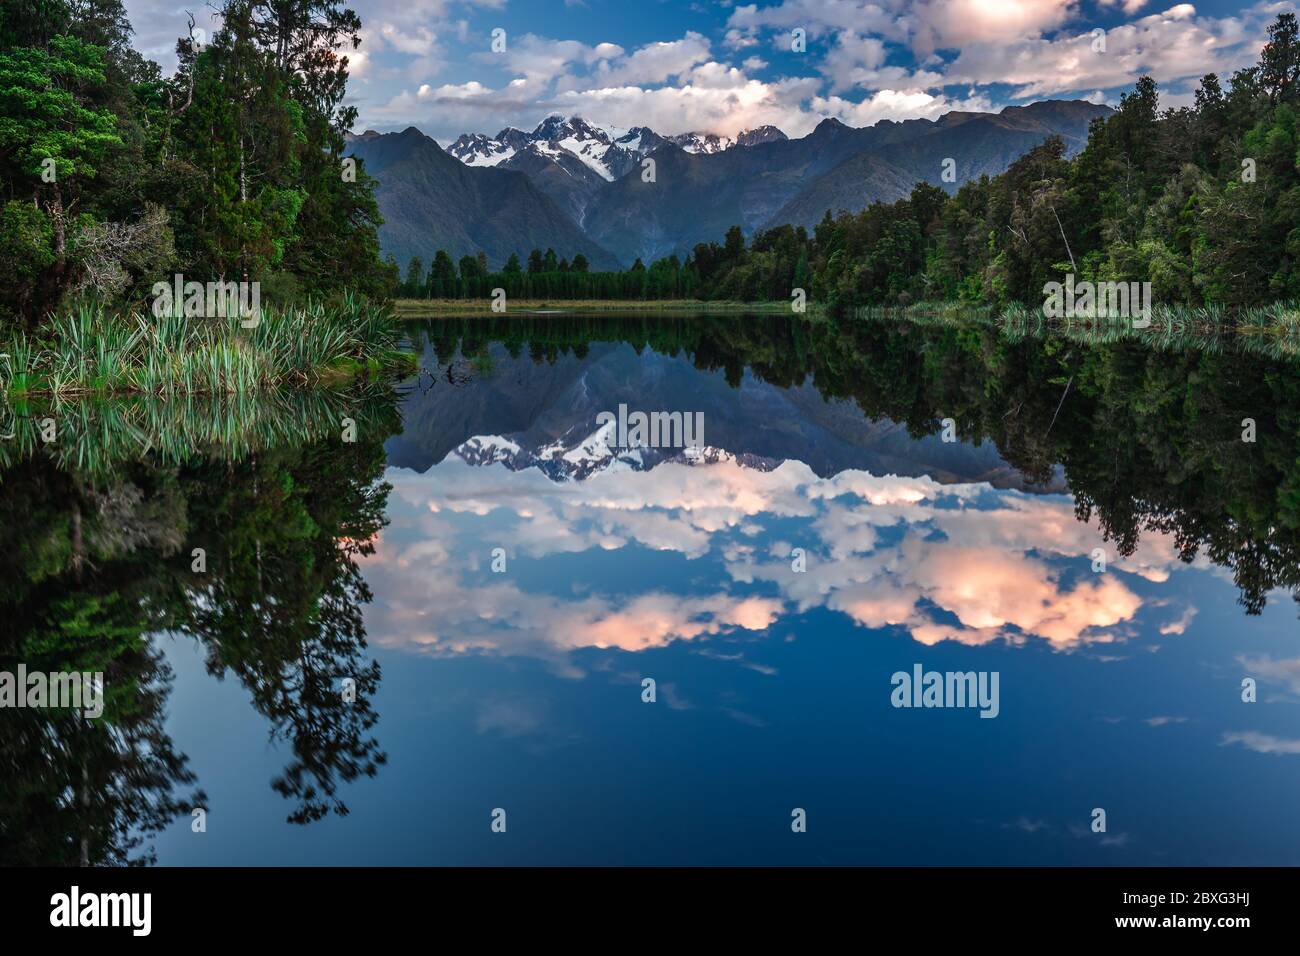 Twin Peaks reflect in the beautiful Lake Matheson, Southern Alps, South ...